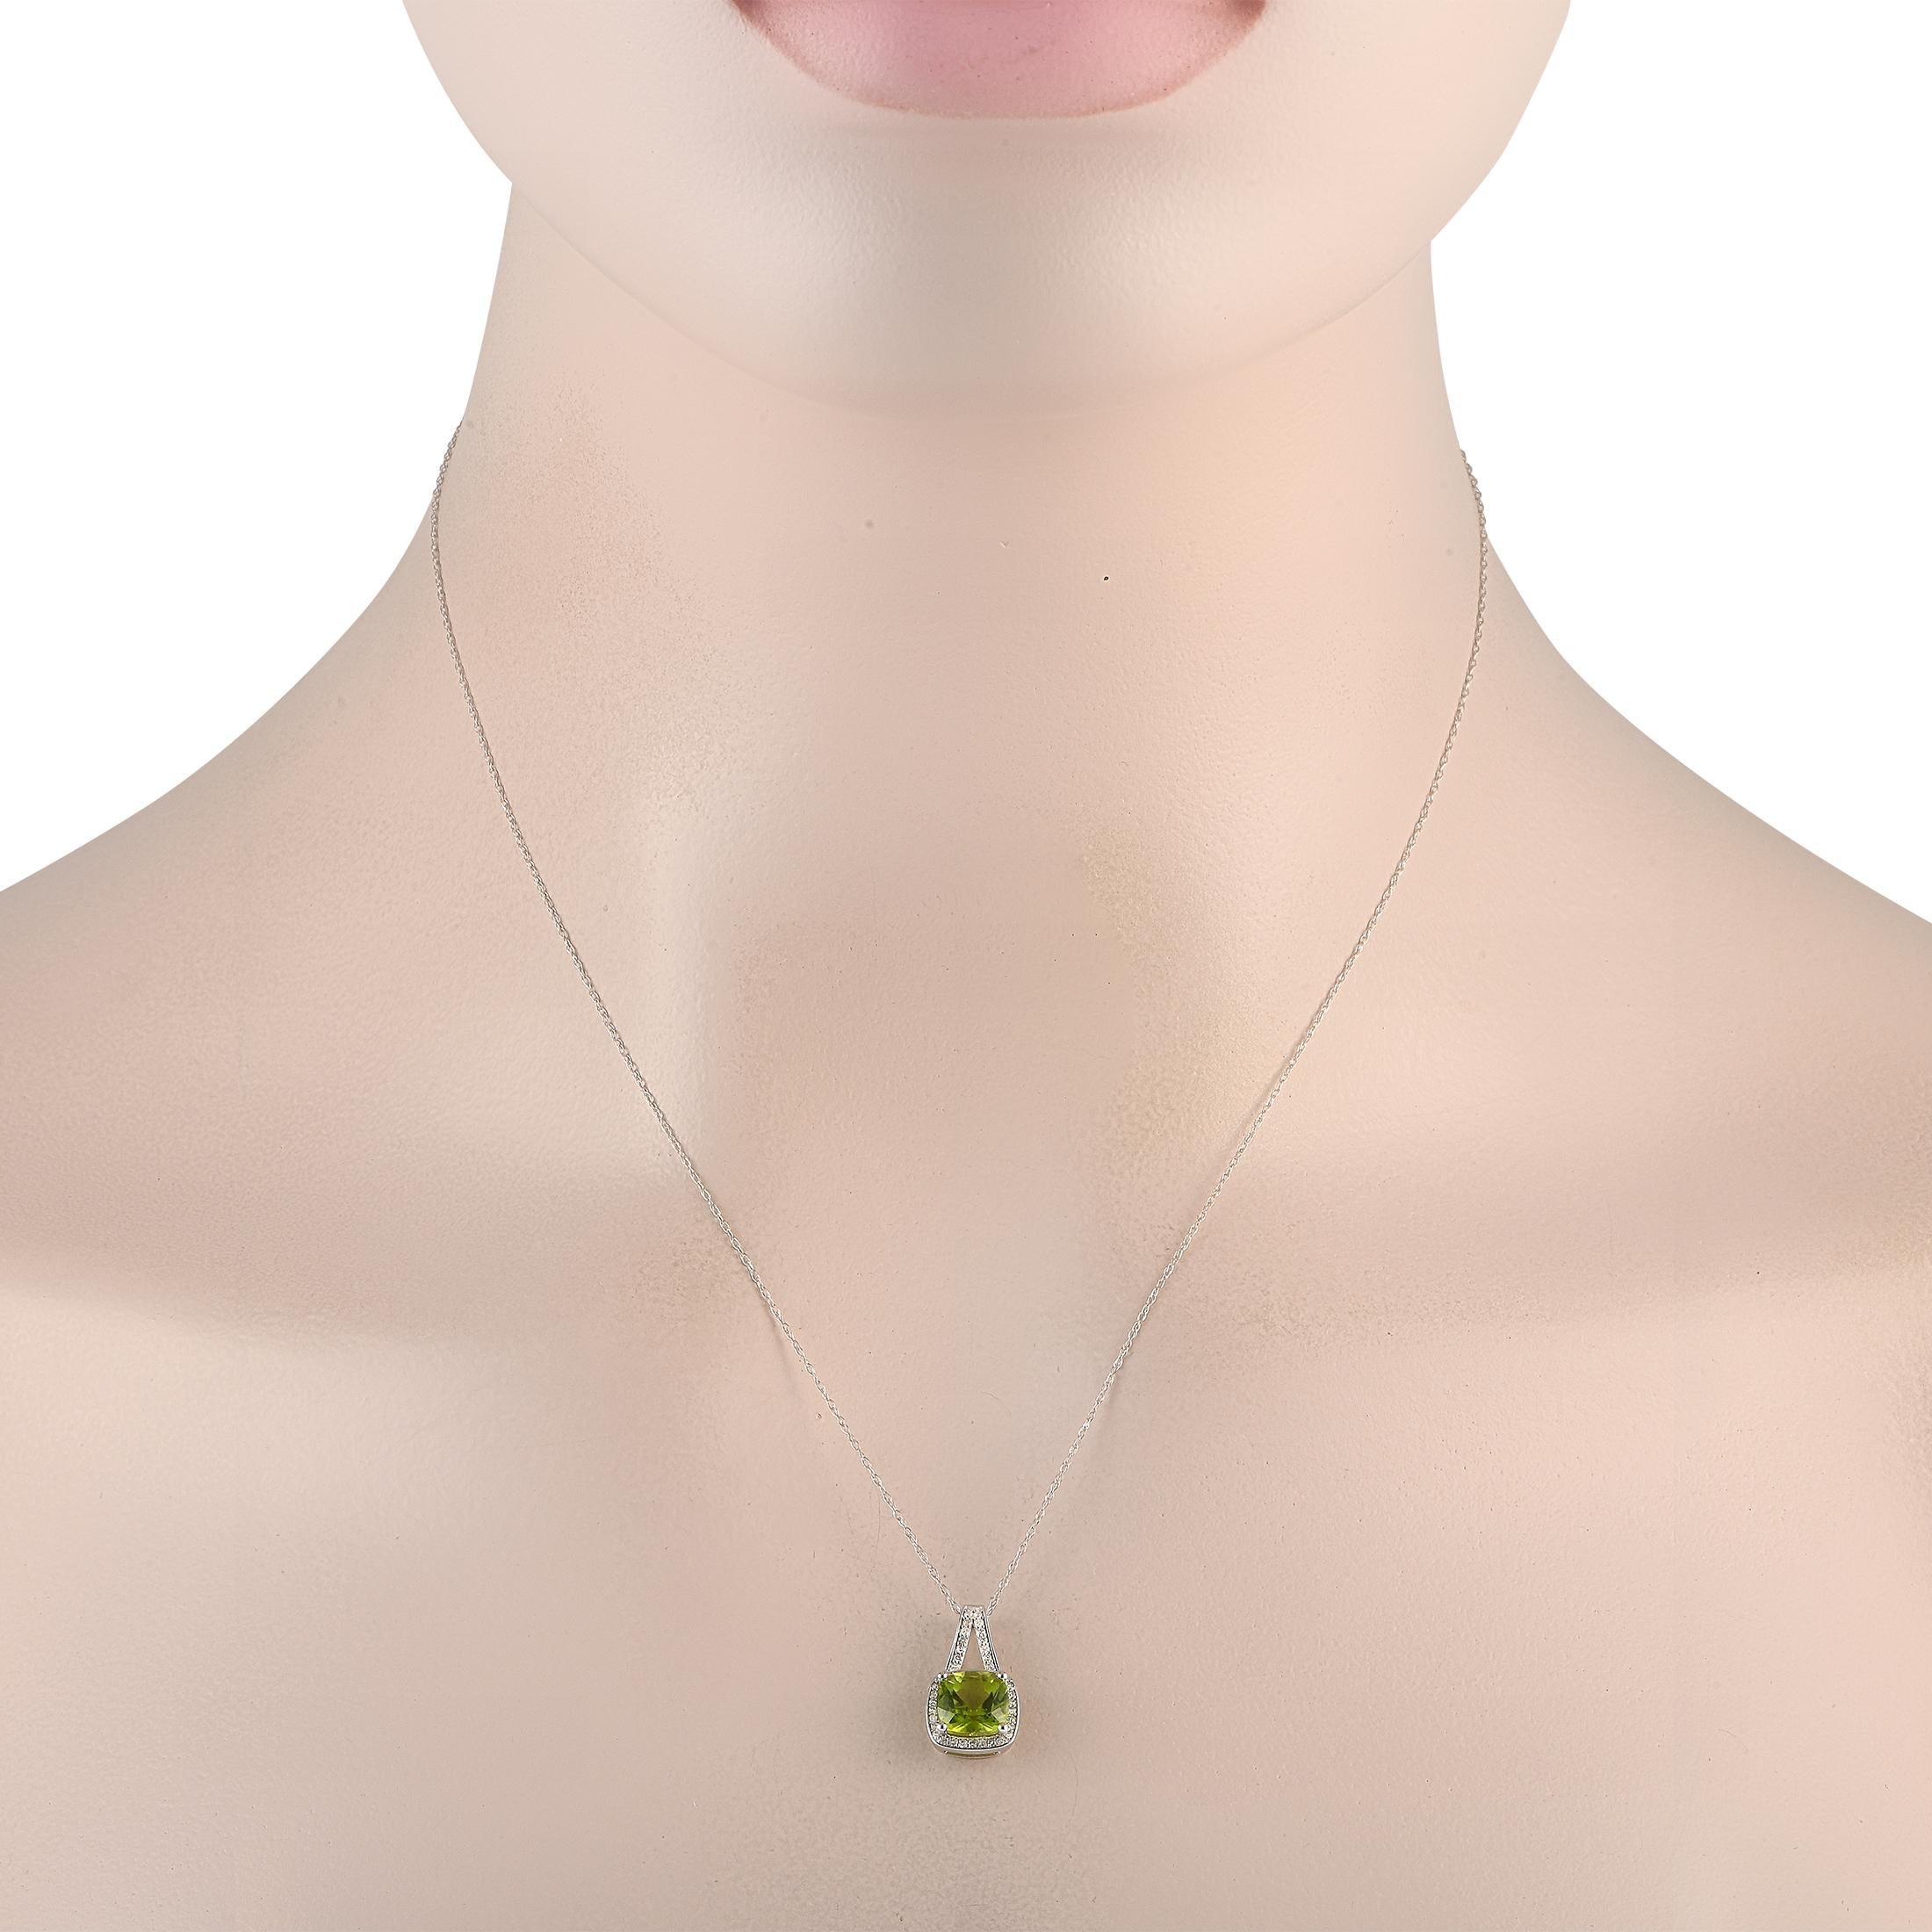 Add some fun to your accessorizing game with this colored gemstone necklace. It features an 18-long double cable chain holding a 0.65 by 0.45 pendant. The pendant held by a diamond-traced split bail has a pillow-shaped peridot glowing exquisitely